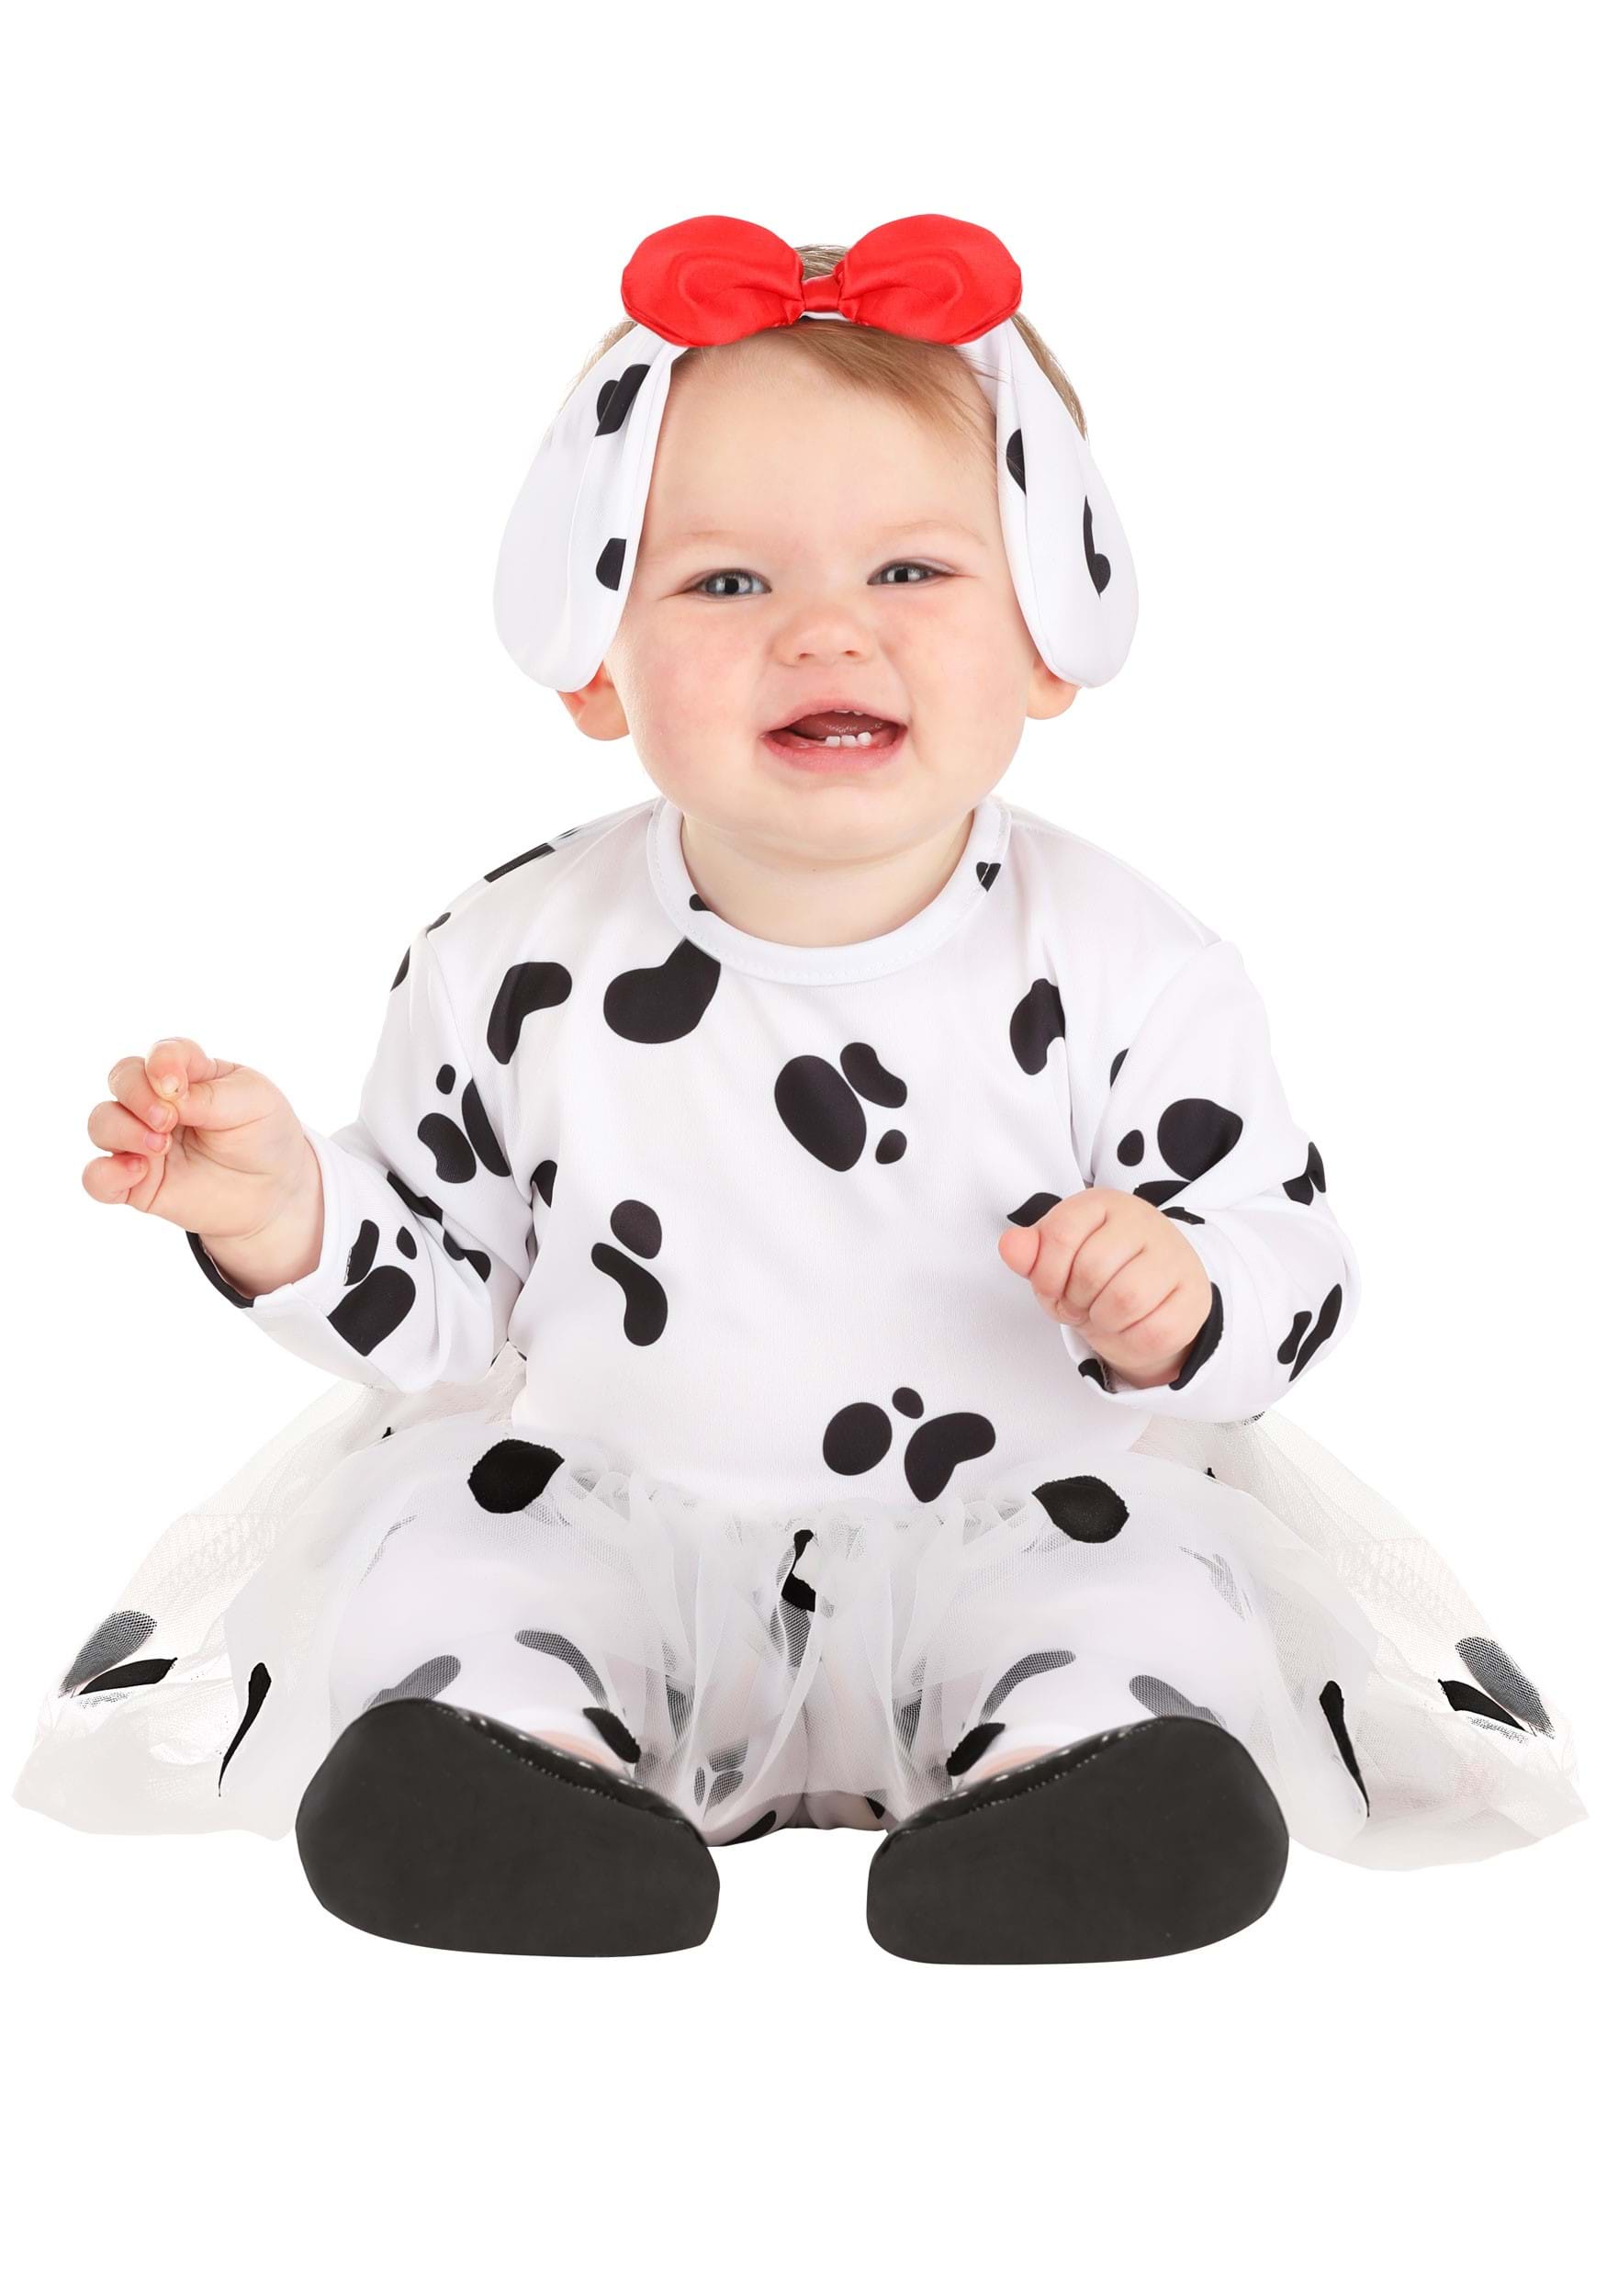 Photos - Fancy Dress FUN Costumes Adorable Dalmatian Infant Costume | Dog Costumes for Babies B